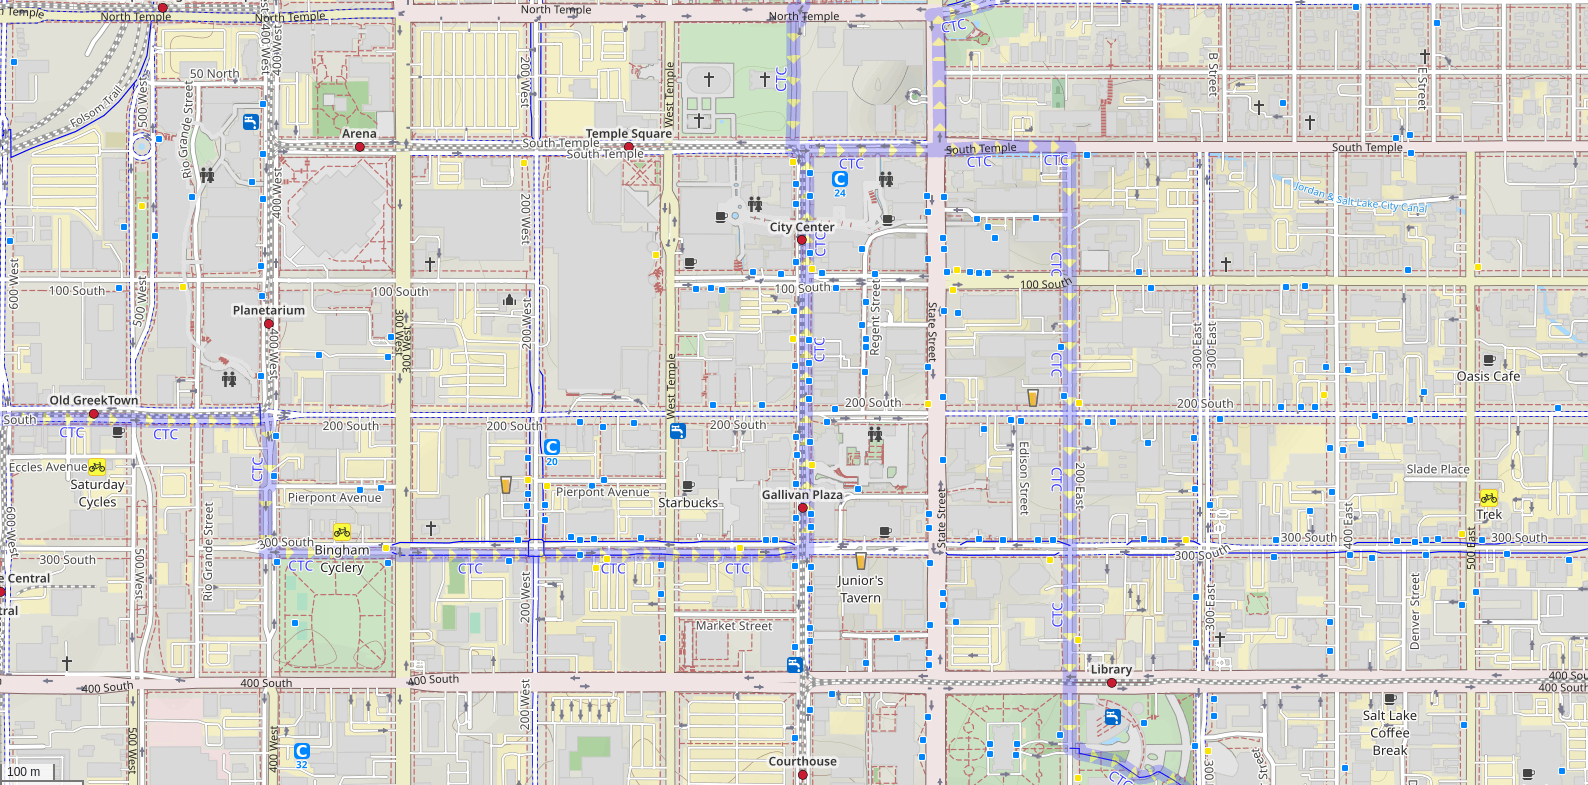 Salt Lake City on openstreetmap.org in the Cycle Map style. Different kinds of cycle routes, such as separate paths, or paths next to car lanes, are highlight in different shades of blue.